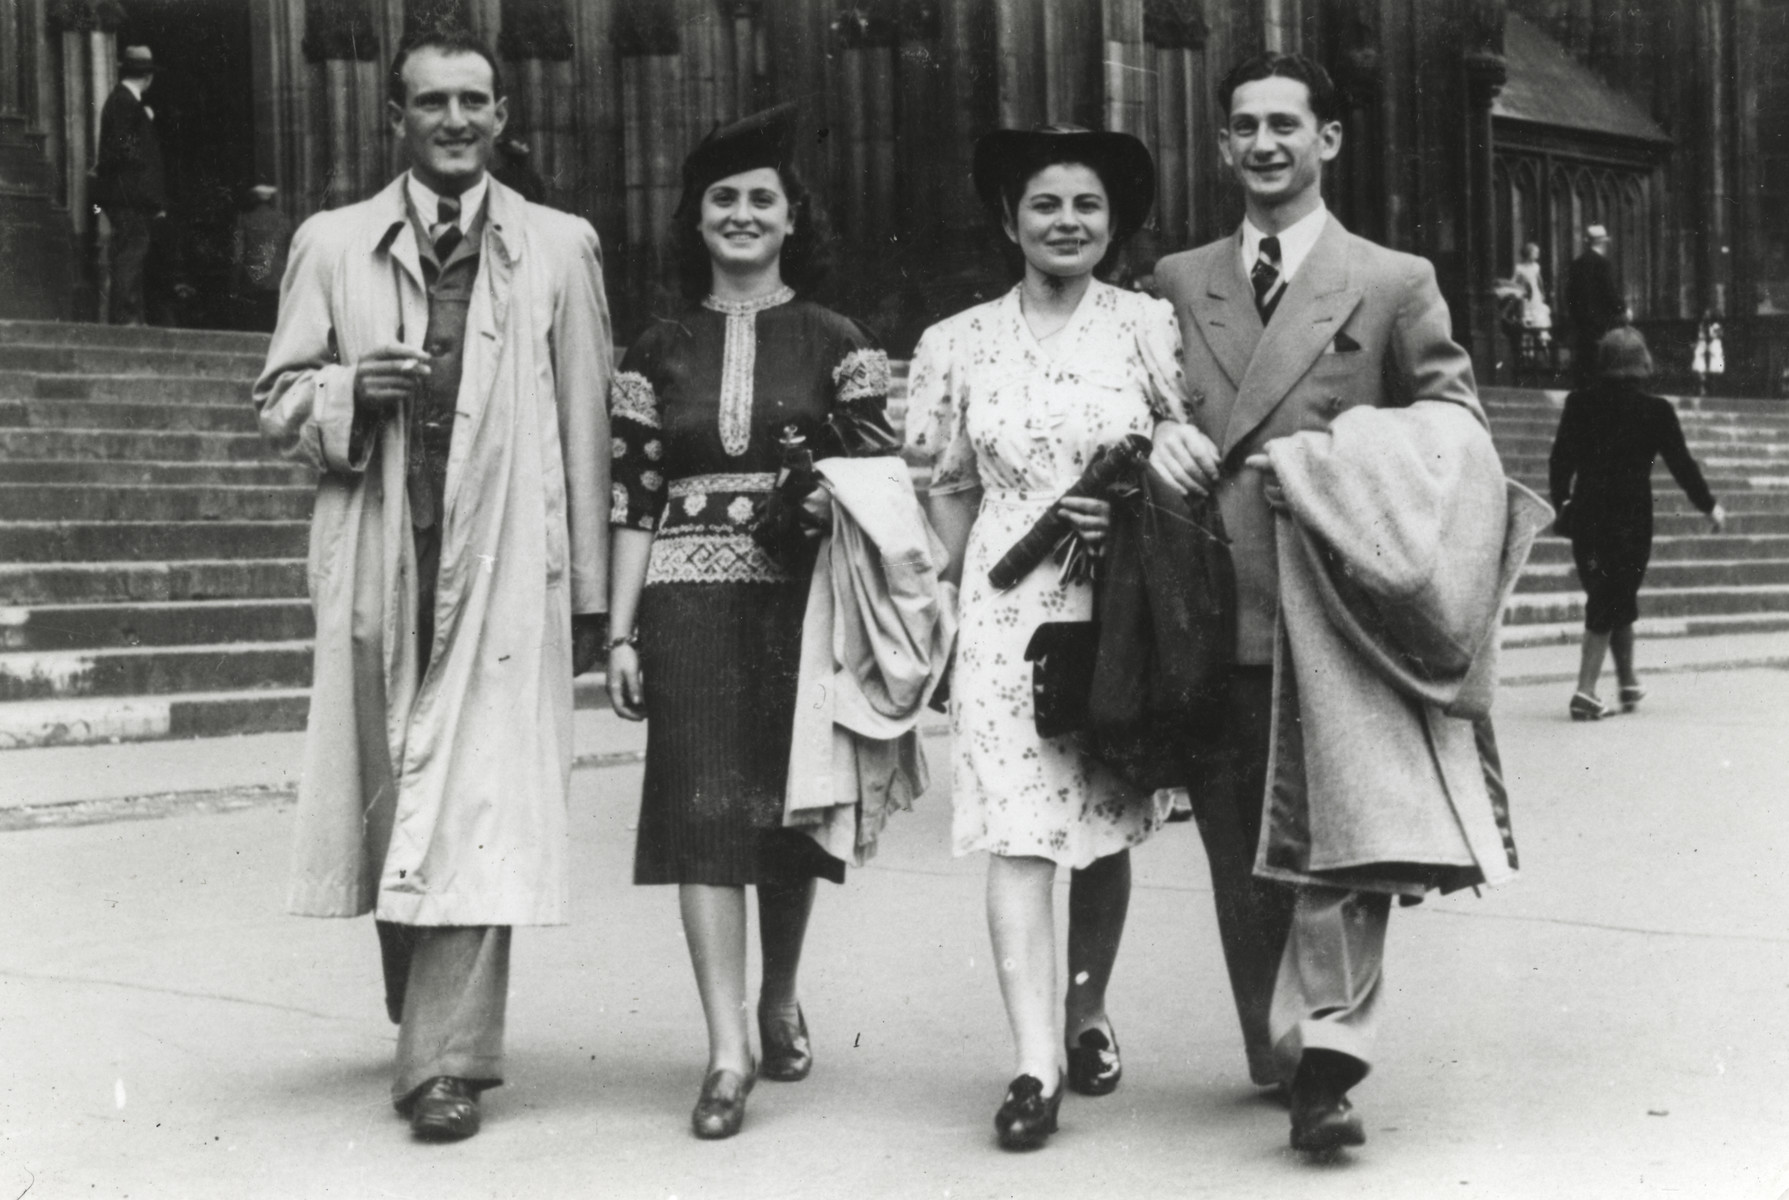 Two Jewish couples walk down a street in Bonn, Germany.

On the left are Herbert and Ruth Meyer who were later deported to Auschwitz.